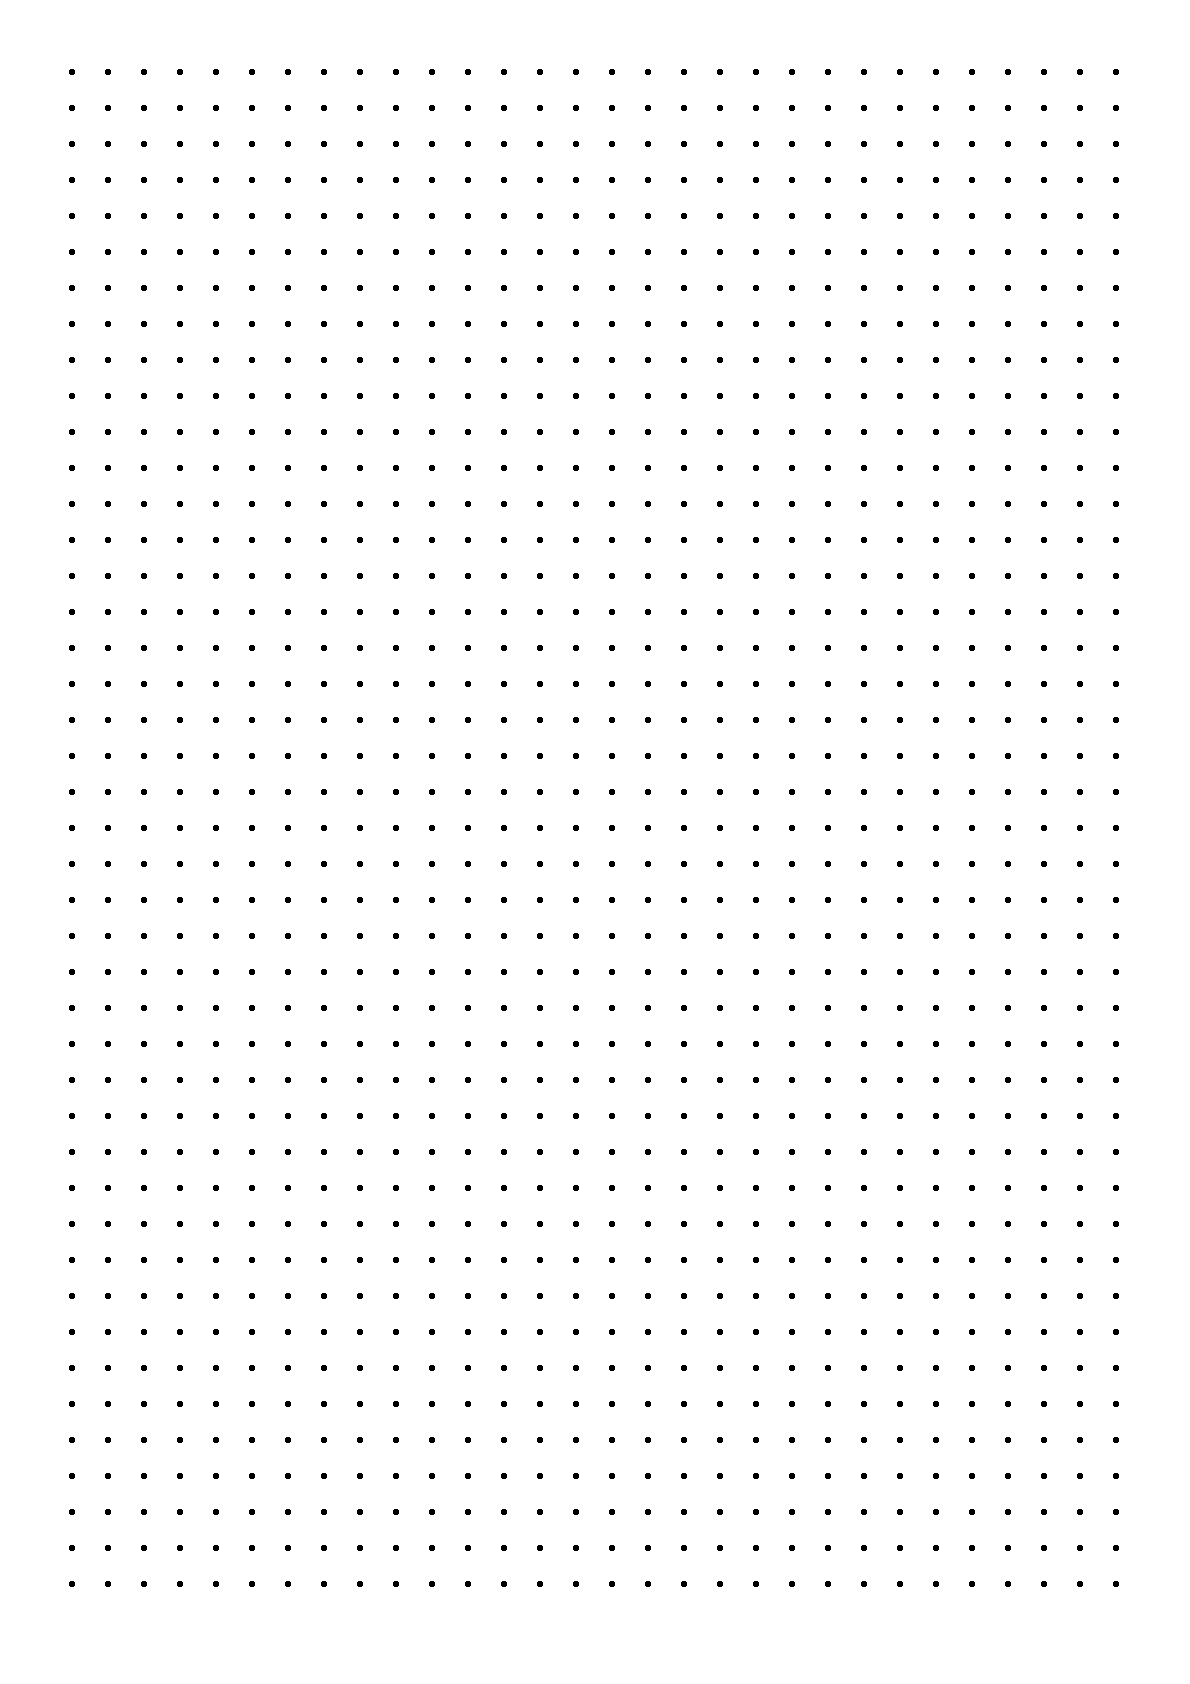 Dot Paper With Four Dots Per Inch On A4 Sized Paper Free Download